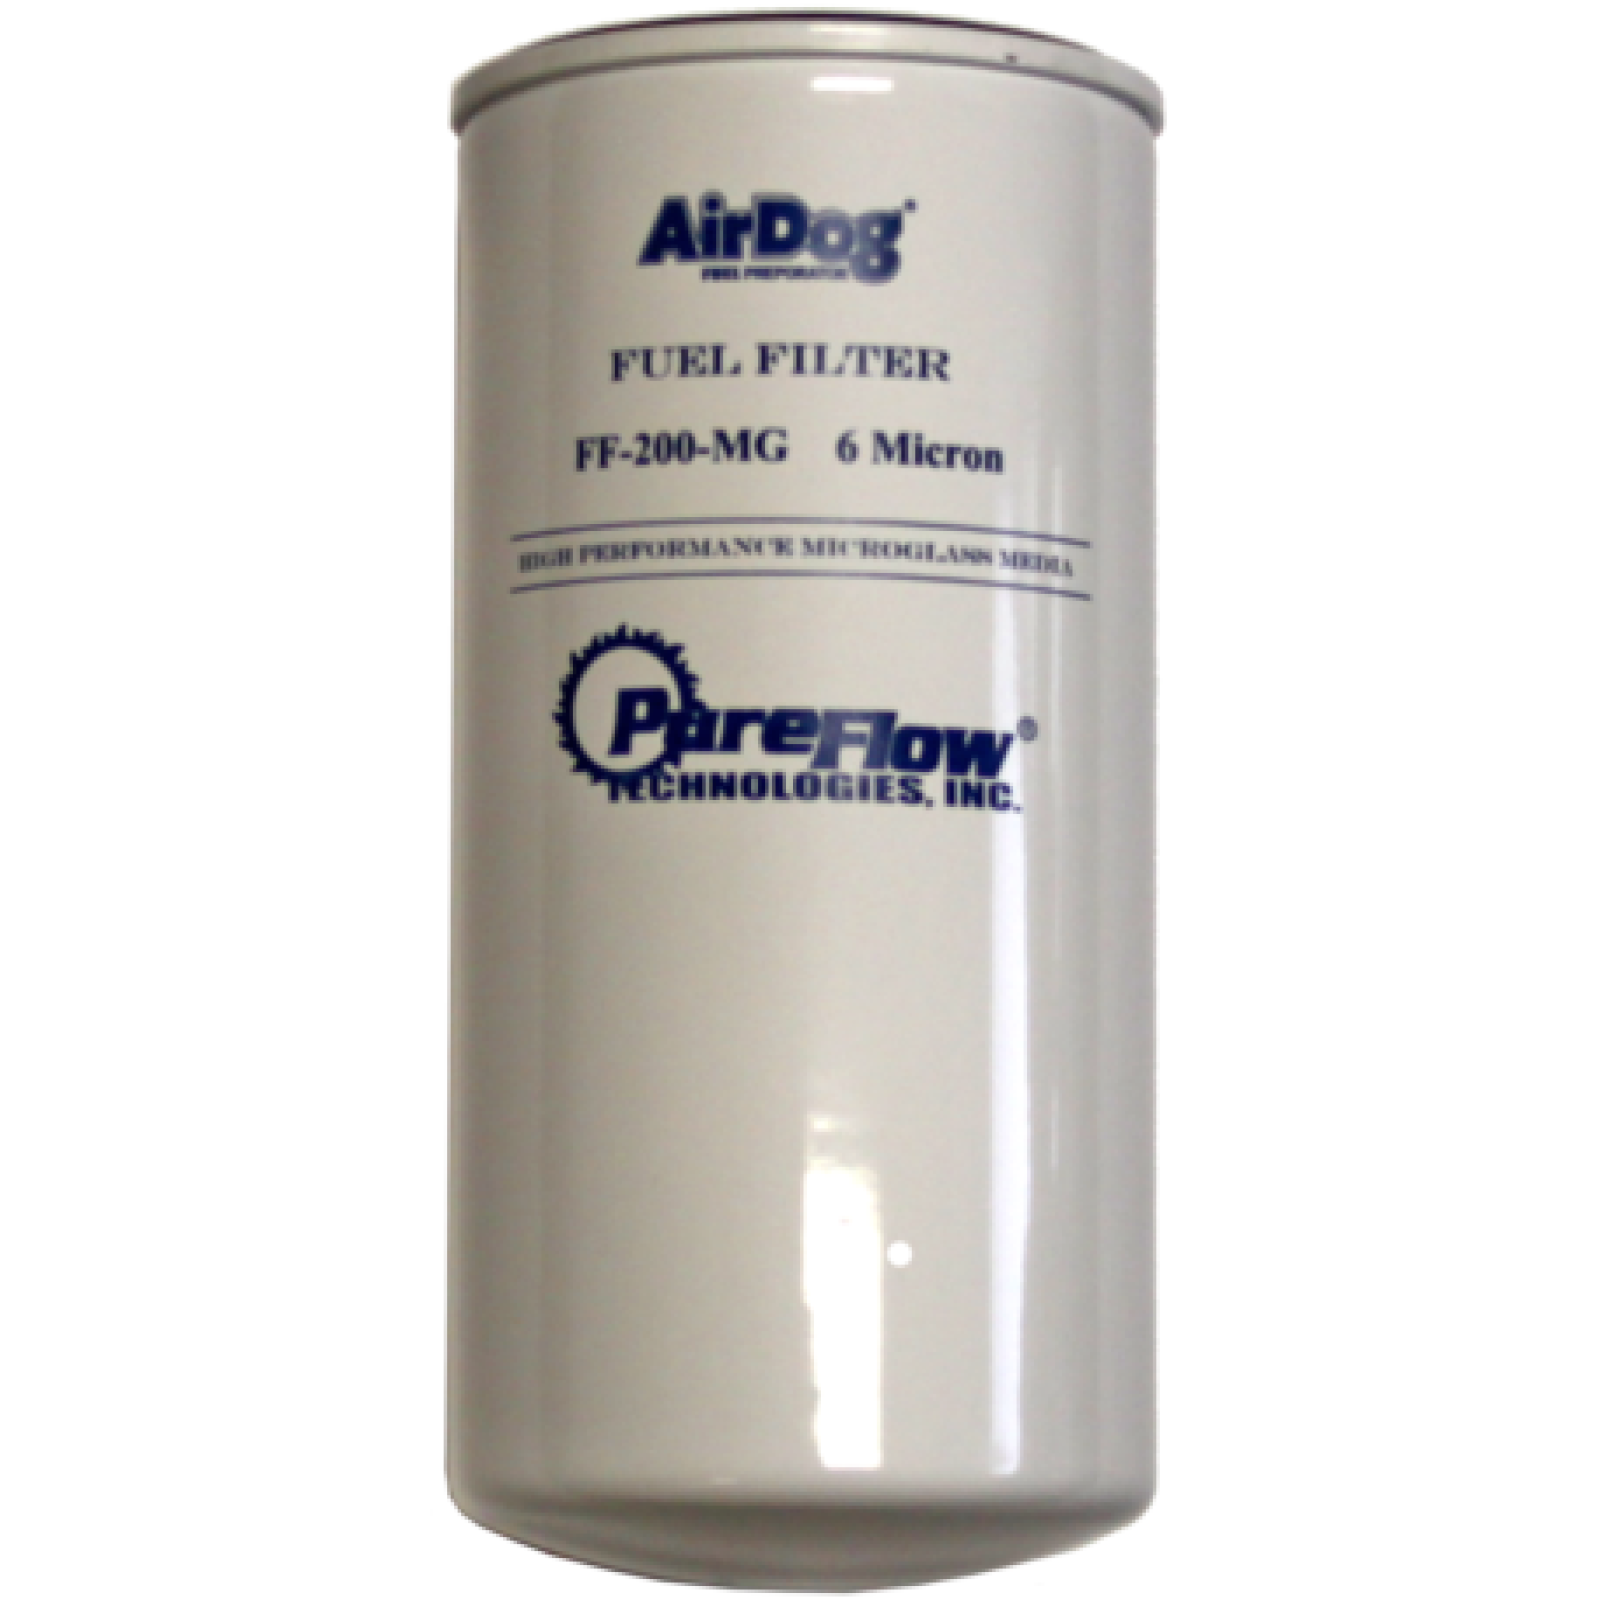 FF200-MG-6: AirDog® Fuel Filter 6 Micron (Microglass Media) for FPII-150 and FPII-200